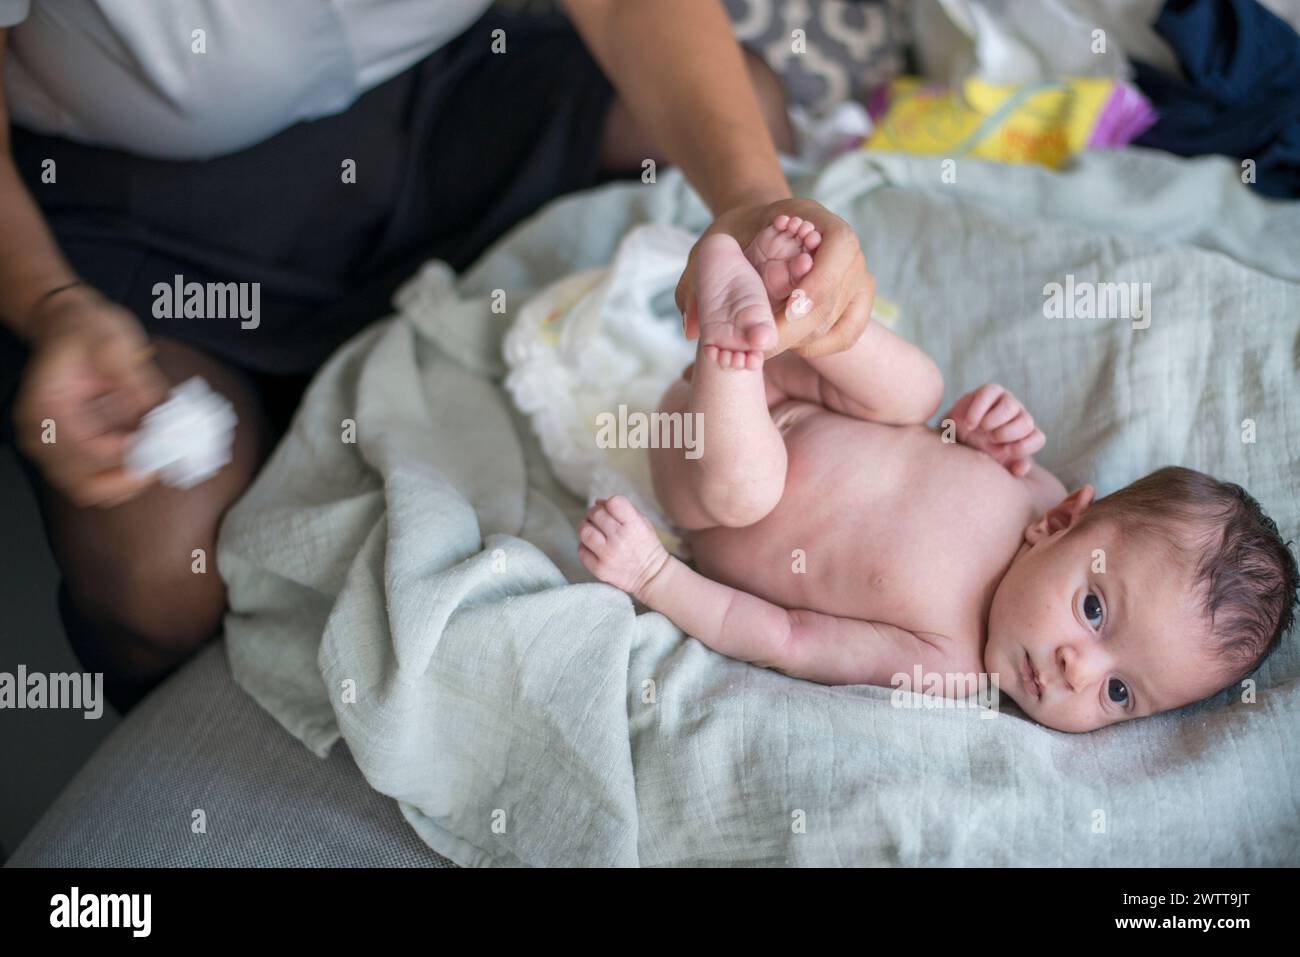 Tender moment during baby's diaper change Stock Photo